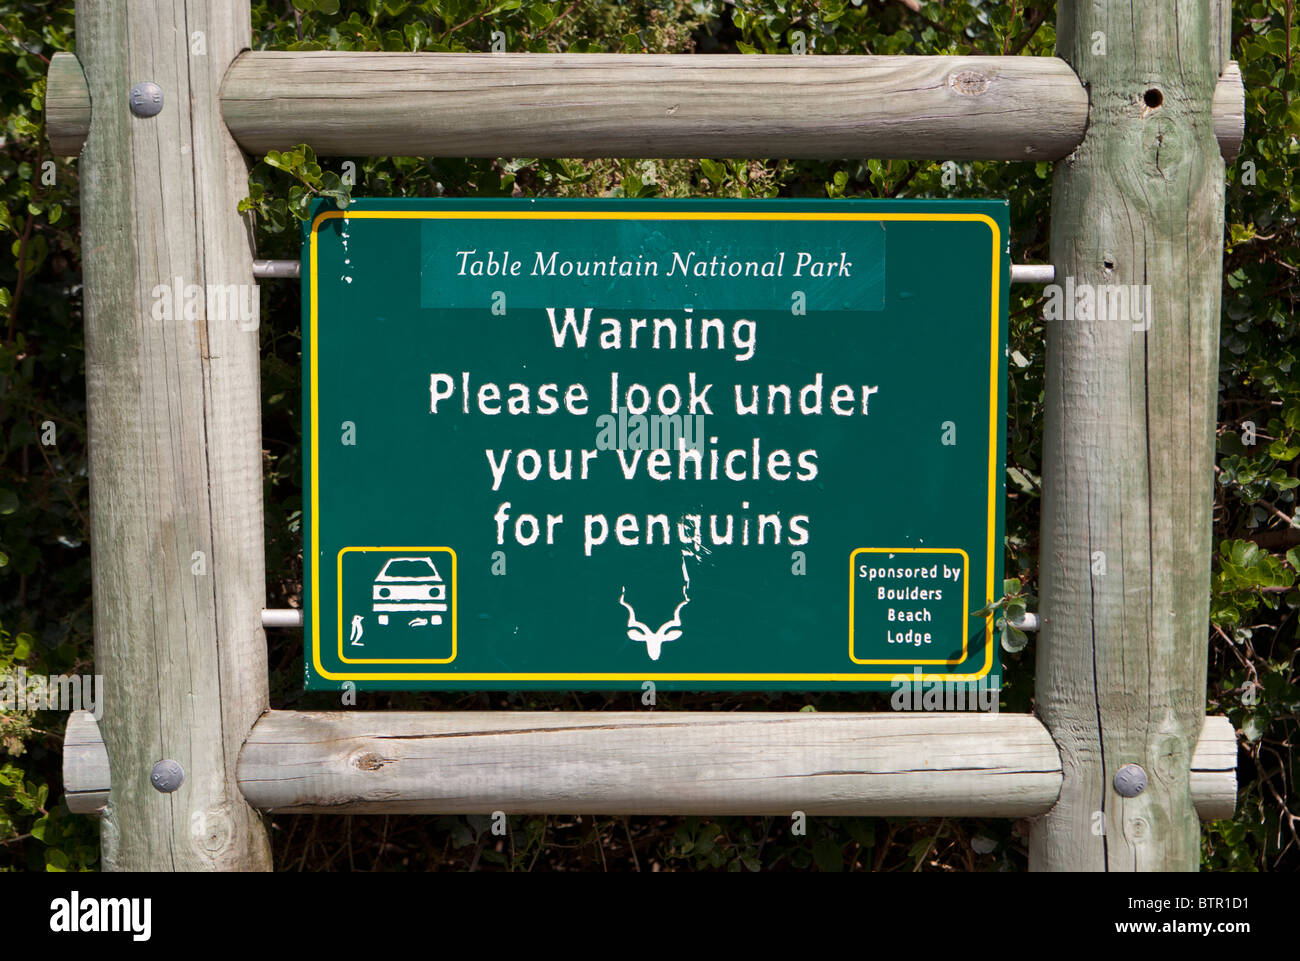 Warning notice 'please look under your vehicles for penguins' Stock Photo